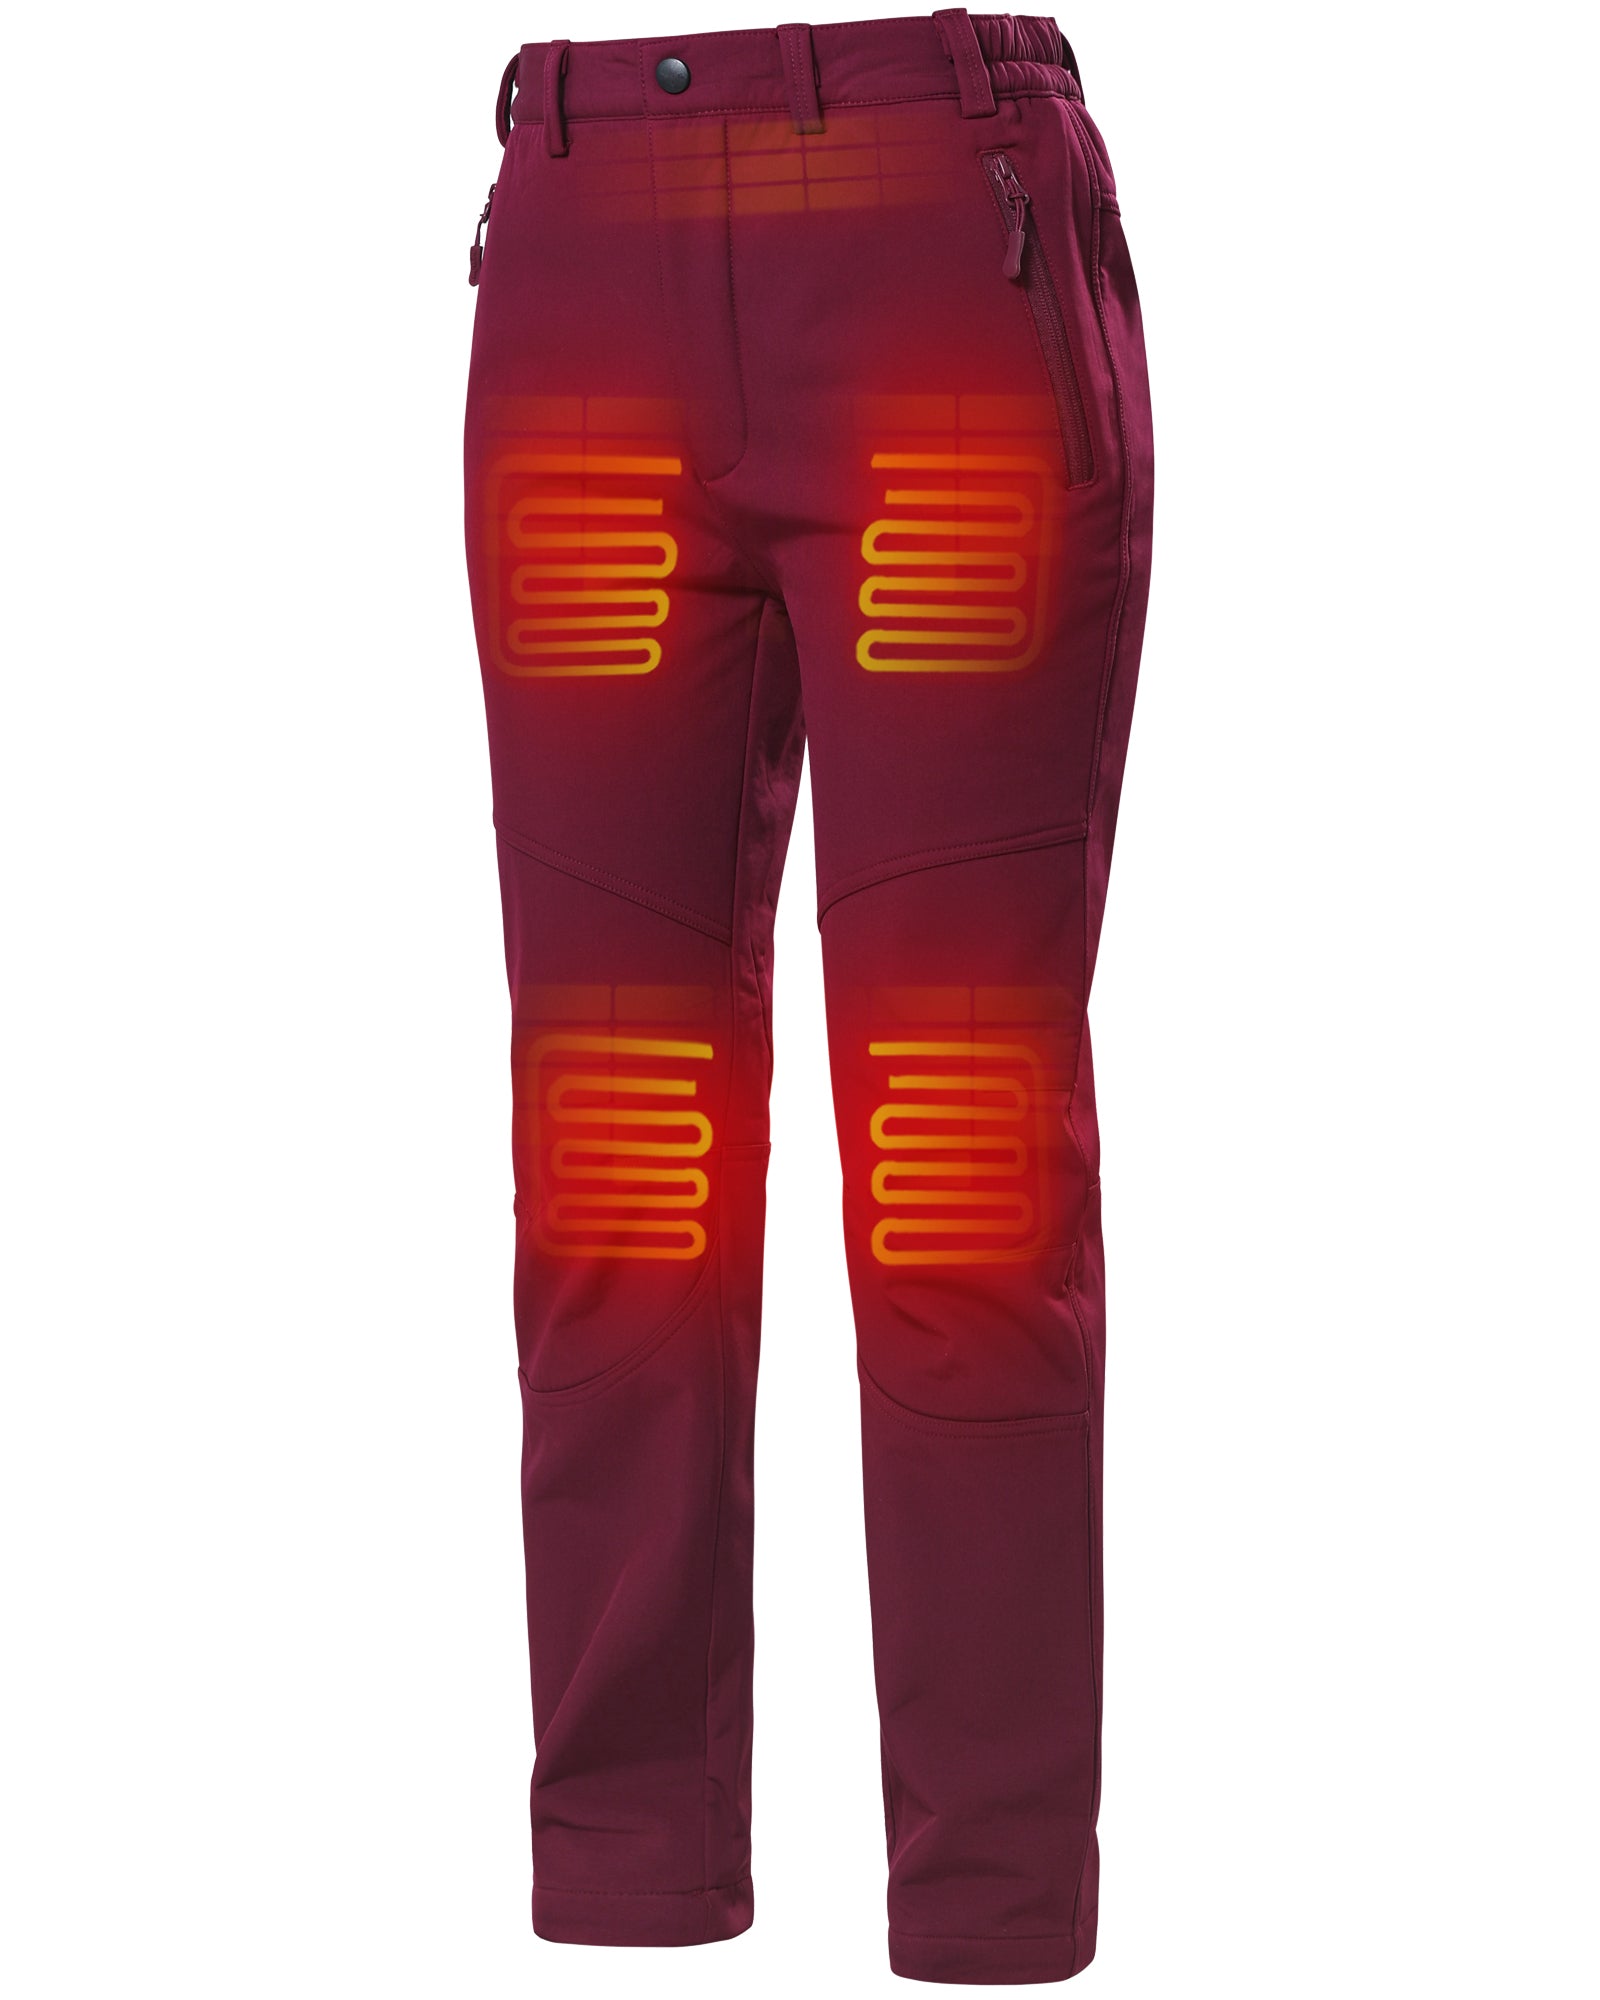 Shldybc Electric Heated Pants, 4 Heating Areas Heated Pants for Women, Heated  Pants with Fleece, Lightweight USB Electric Heated Pants with 3 Heating  Level (Battery Pack Not Included) on Clearance 